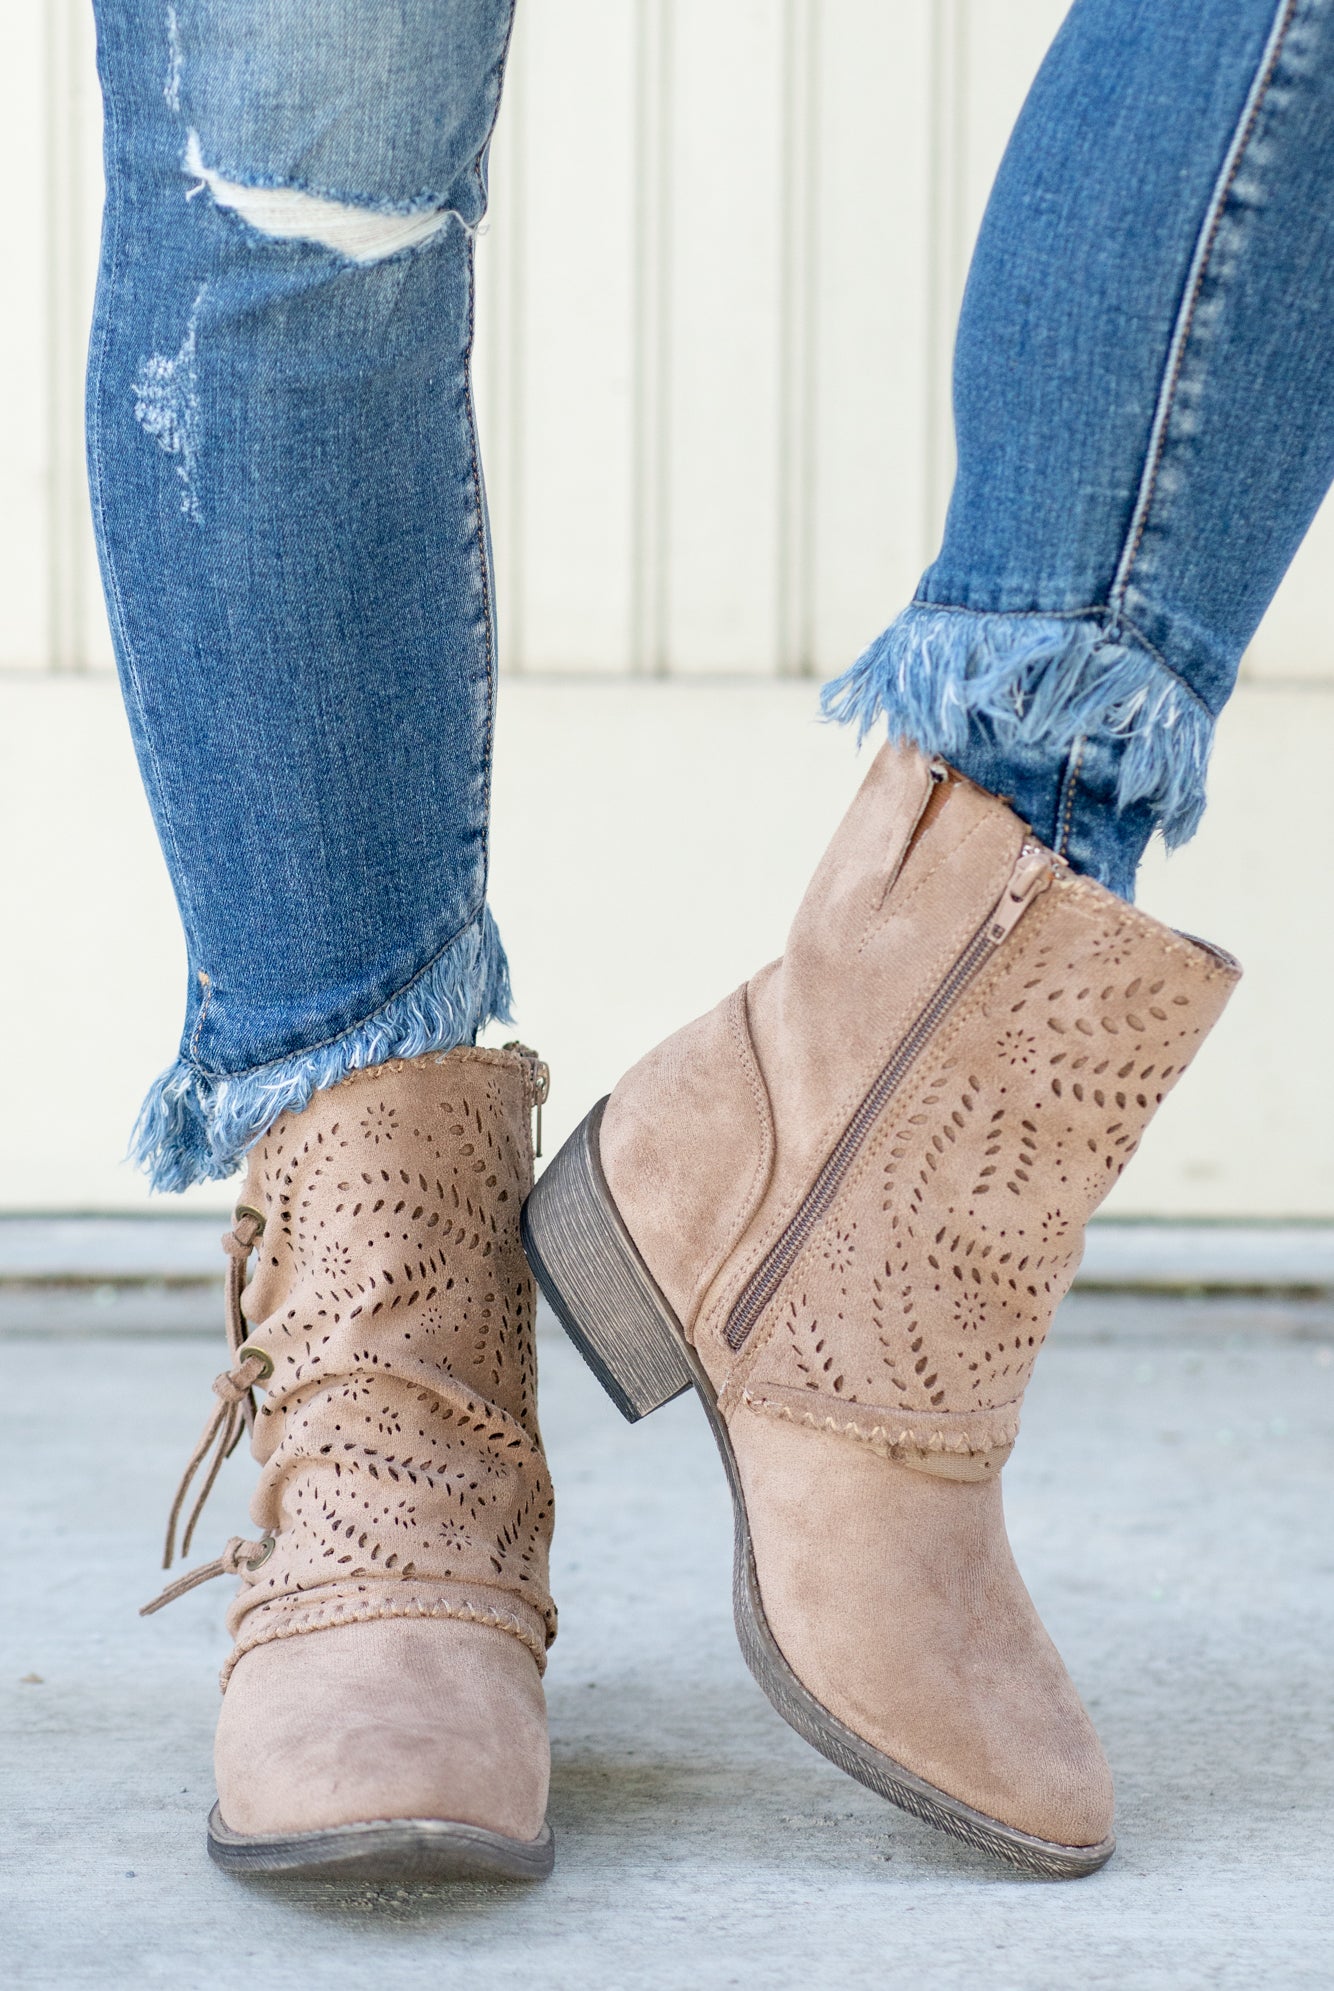 Booties | Very G  These booties from Very G are perfect to wear with your favorite jeans this is fall.  Style Name: Syndey Color: Taupe Cut: Zip Up Side Rubber Sole Style #: VGLB0340-Taupe Contact us for any additional measurements or sizing.